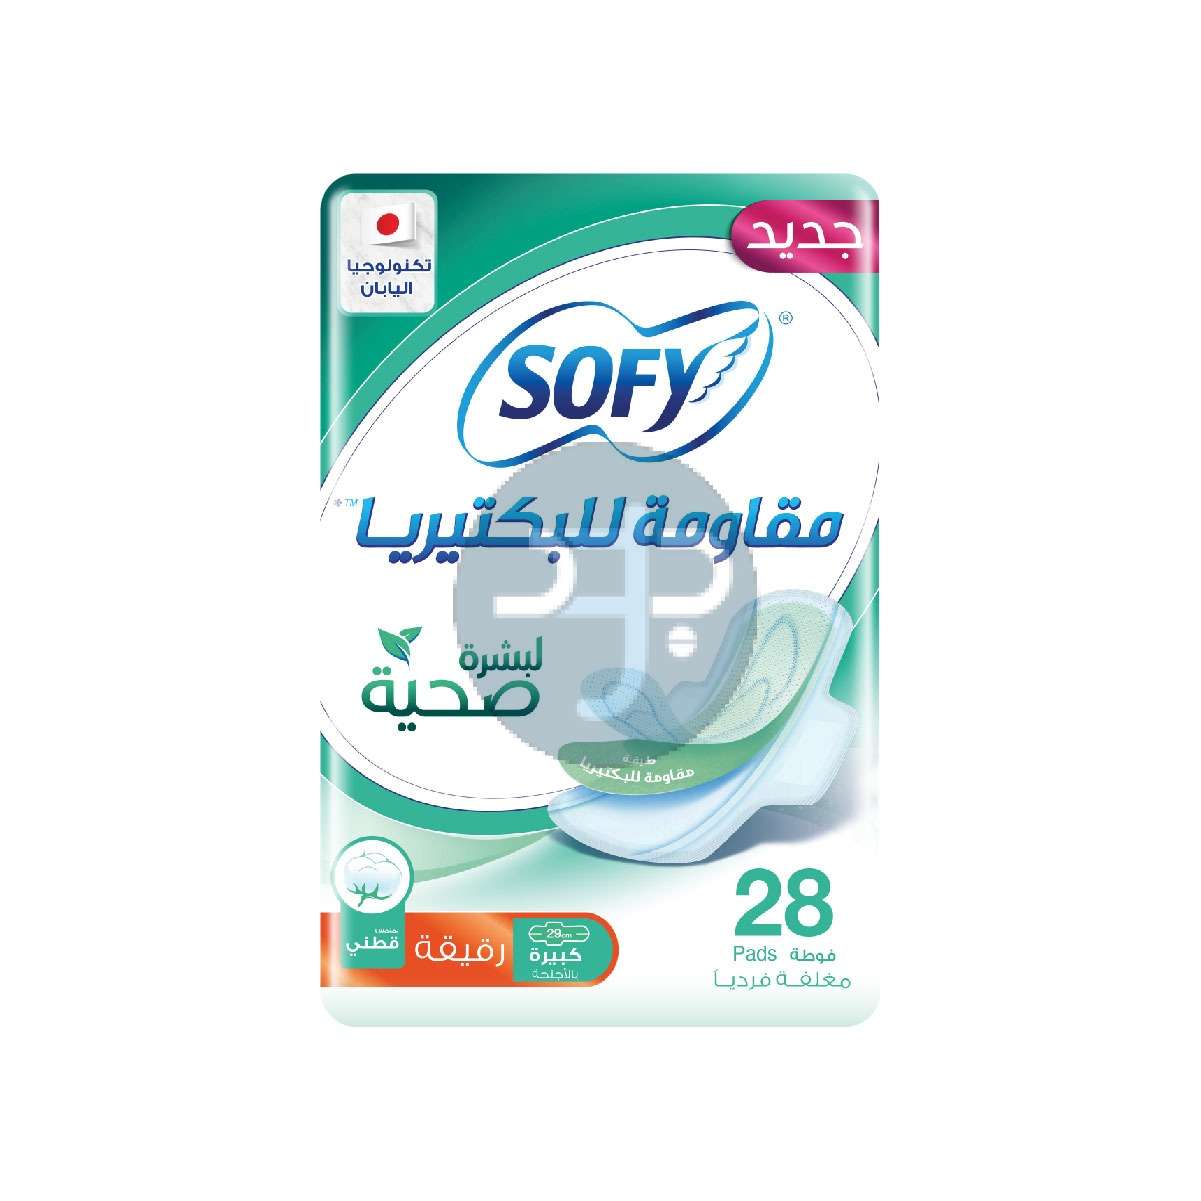 Product-SOFY Anti-Bacterial Sanitary Pads with Wings, Slim, Large 29 cm, Pack of 28 Pads